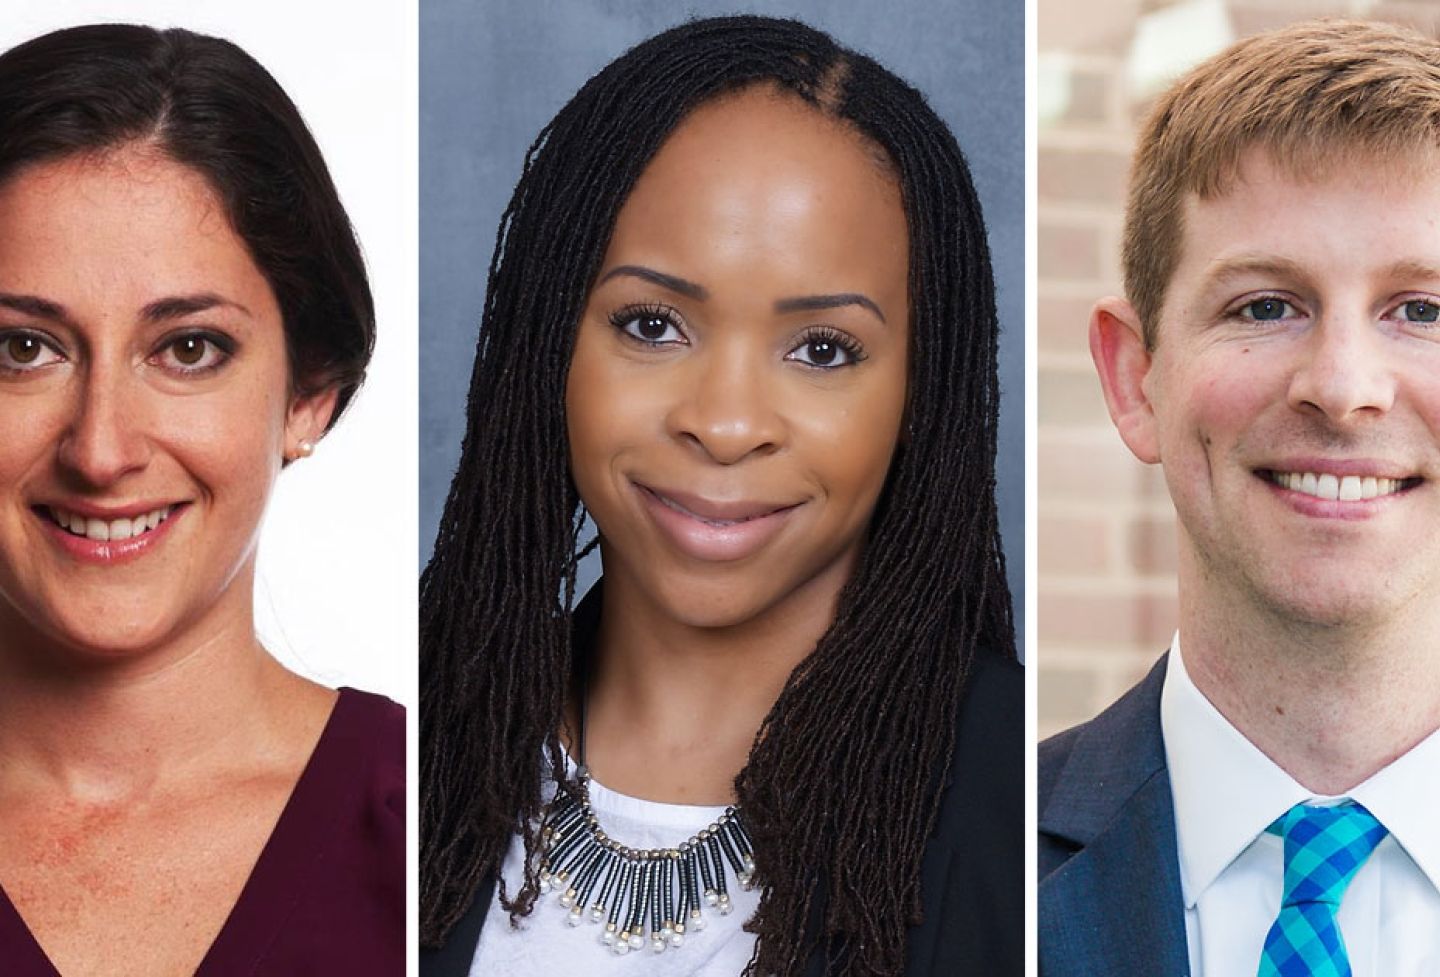 Three alumni — Claire Blumenson ’11, Chioma Chukwu ’12 and Chris Kavanaugh ’06 — were honored for their public service work at the fourth annual Shaping Justice conference in February.